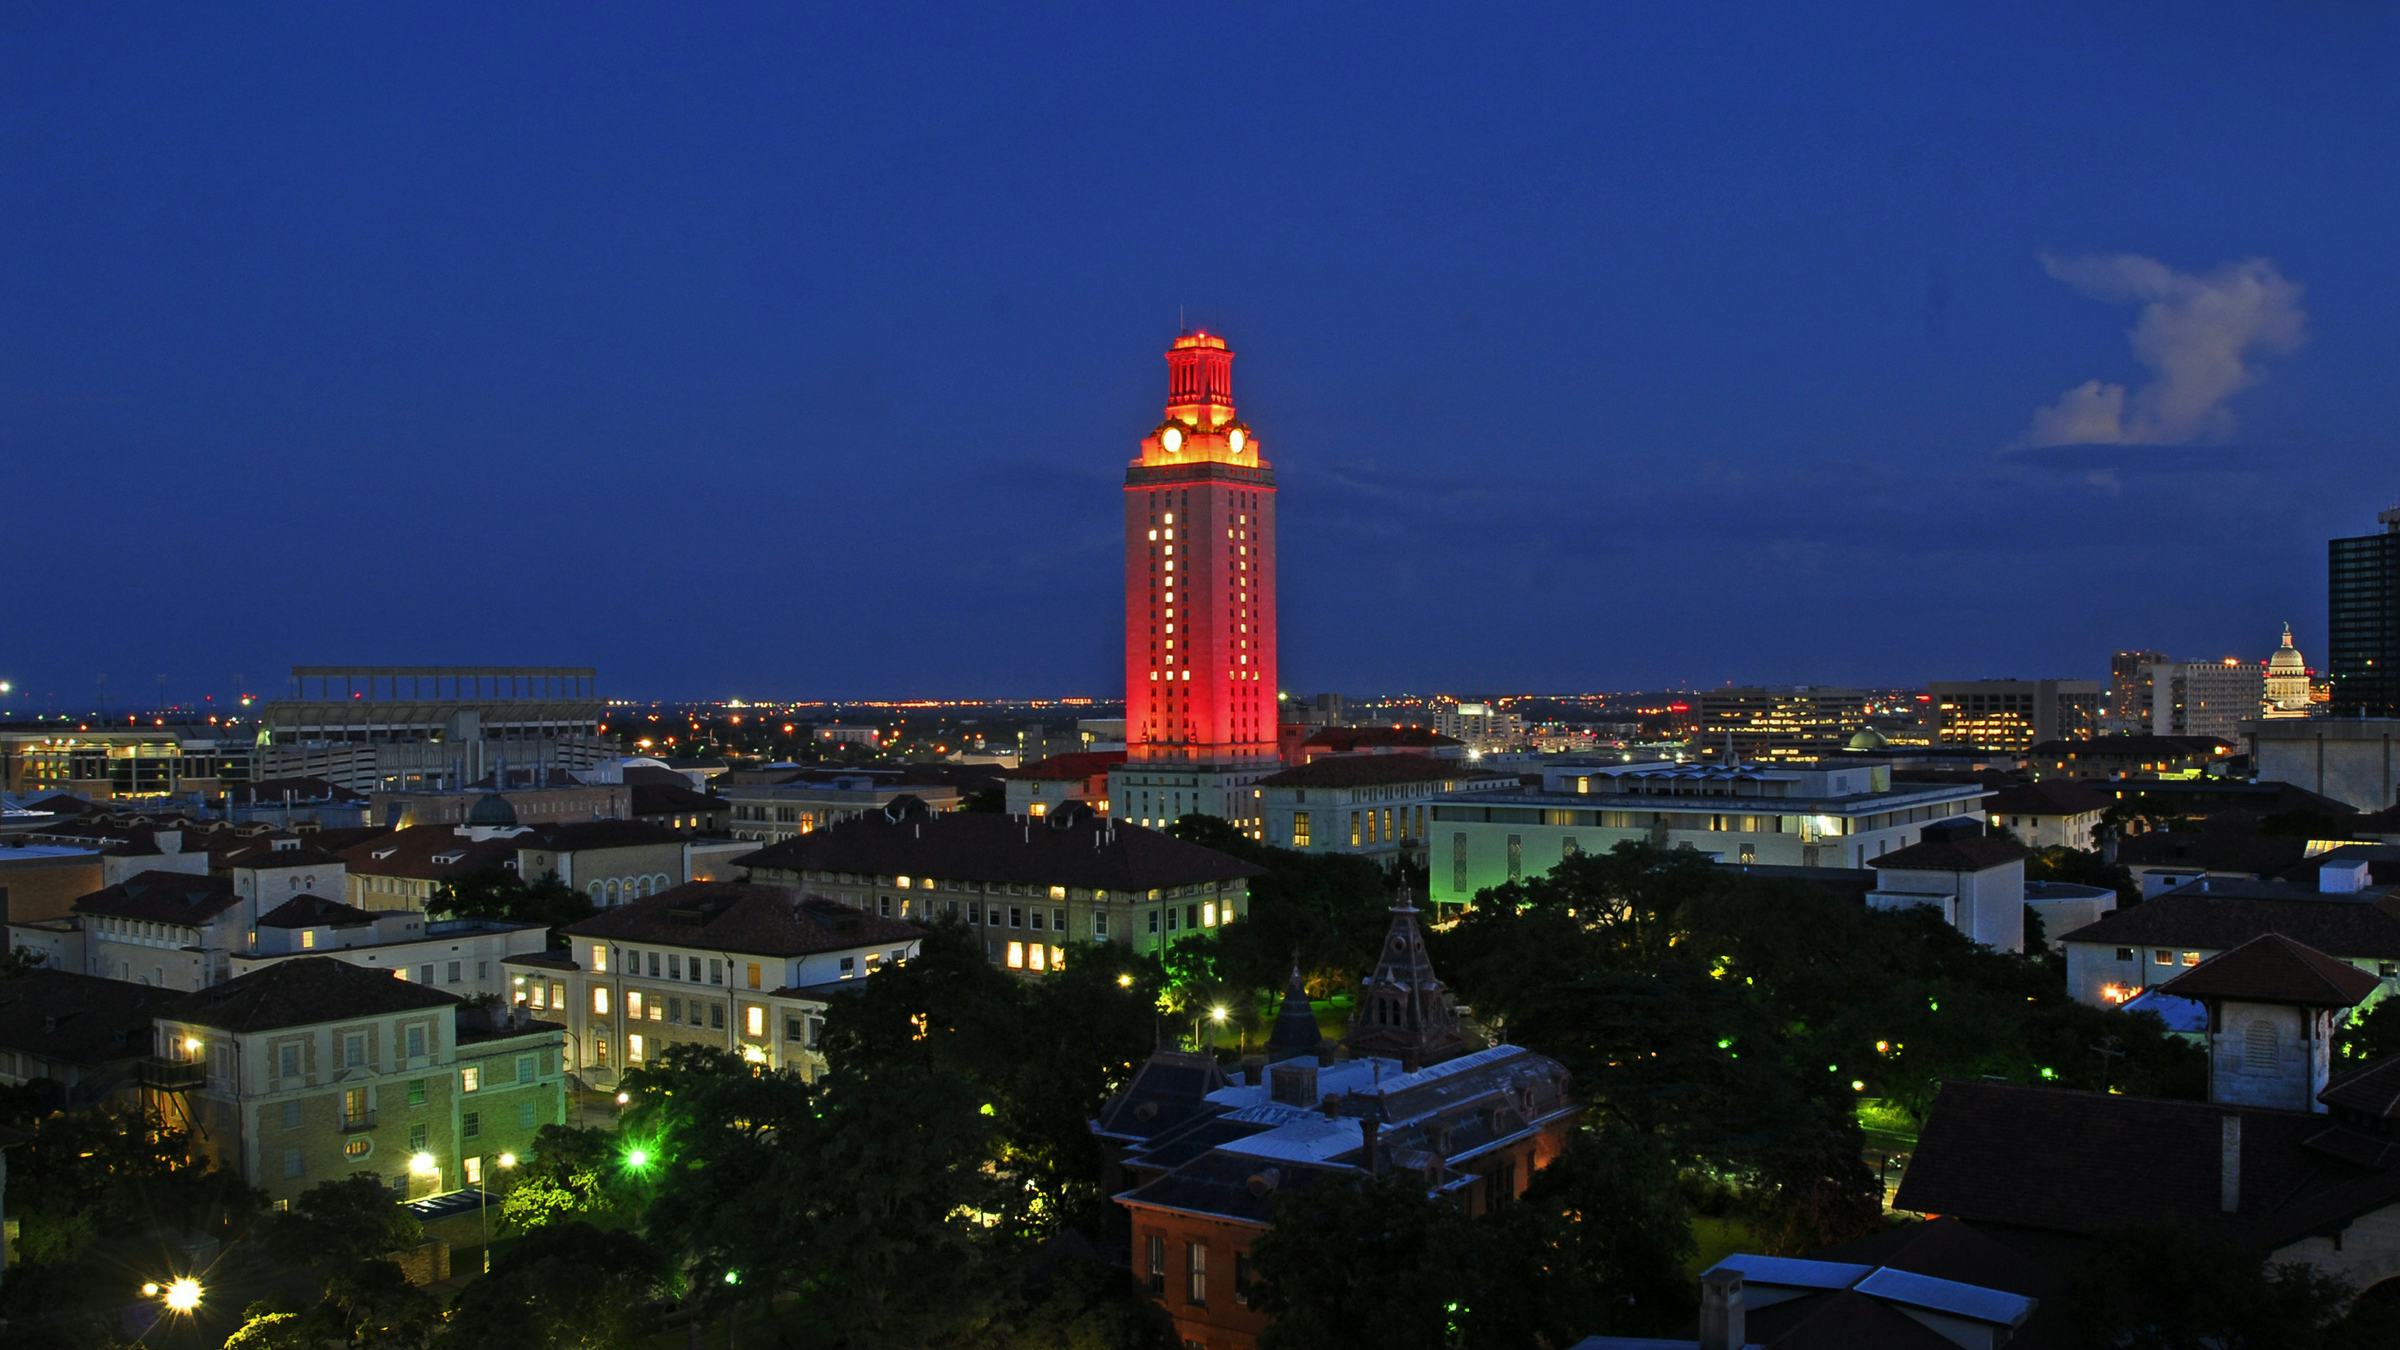 The UT Tower at night lit orange with a 1 in celebration of victory